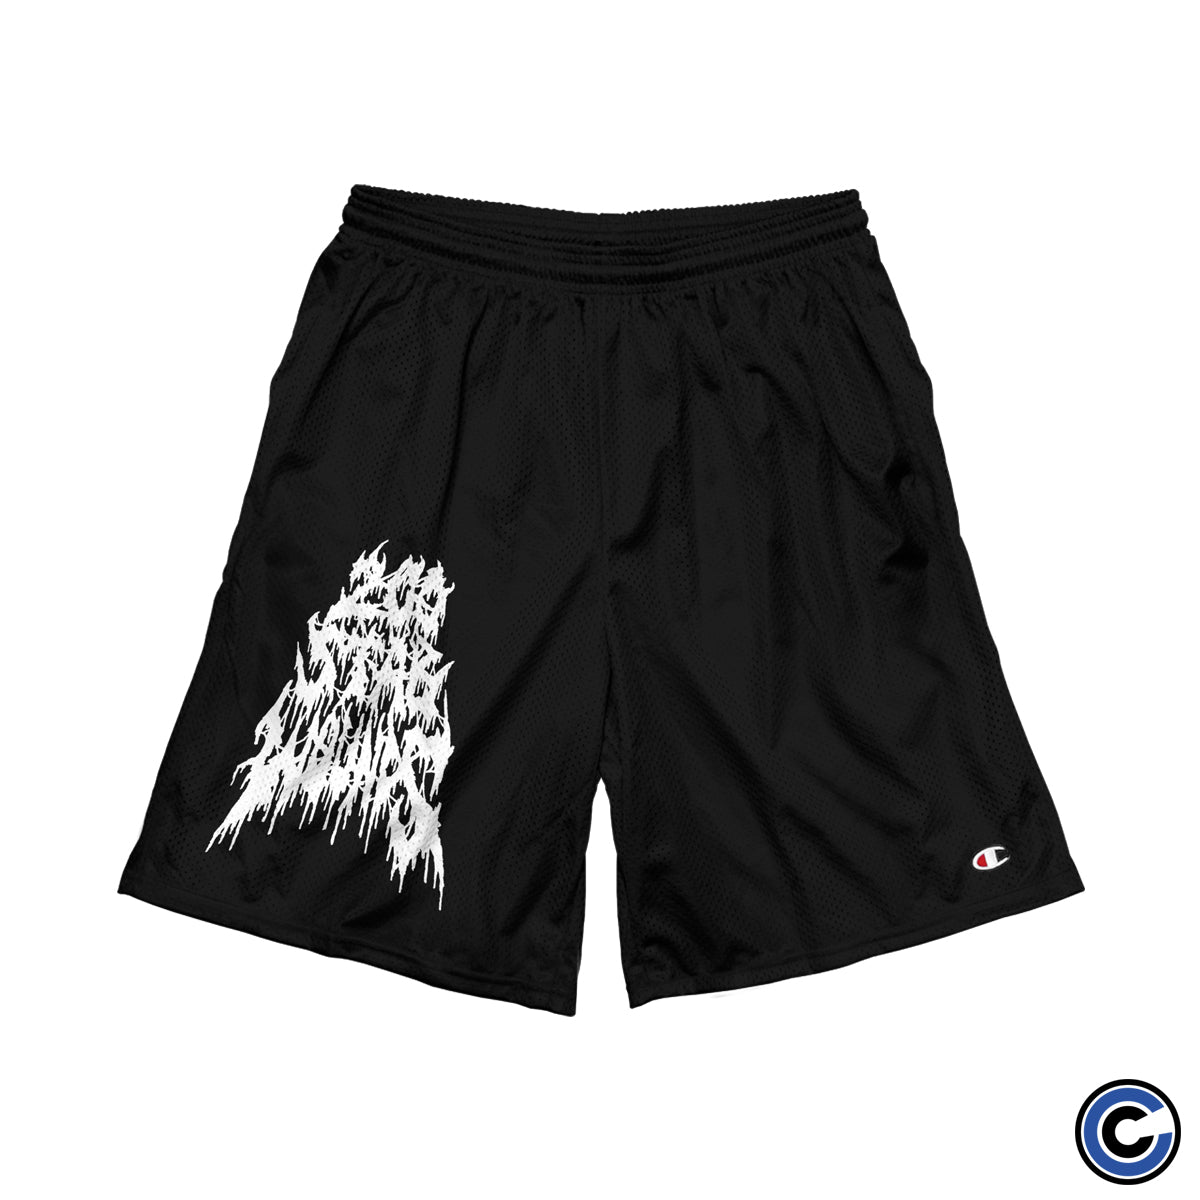 200 Stab Wounds "Logo" Shorts